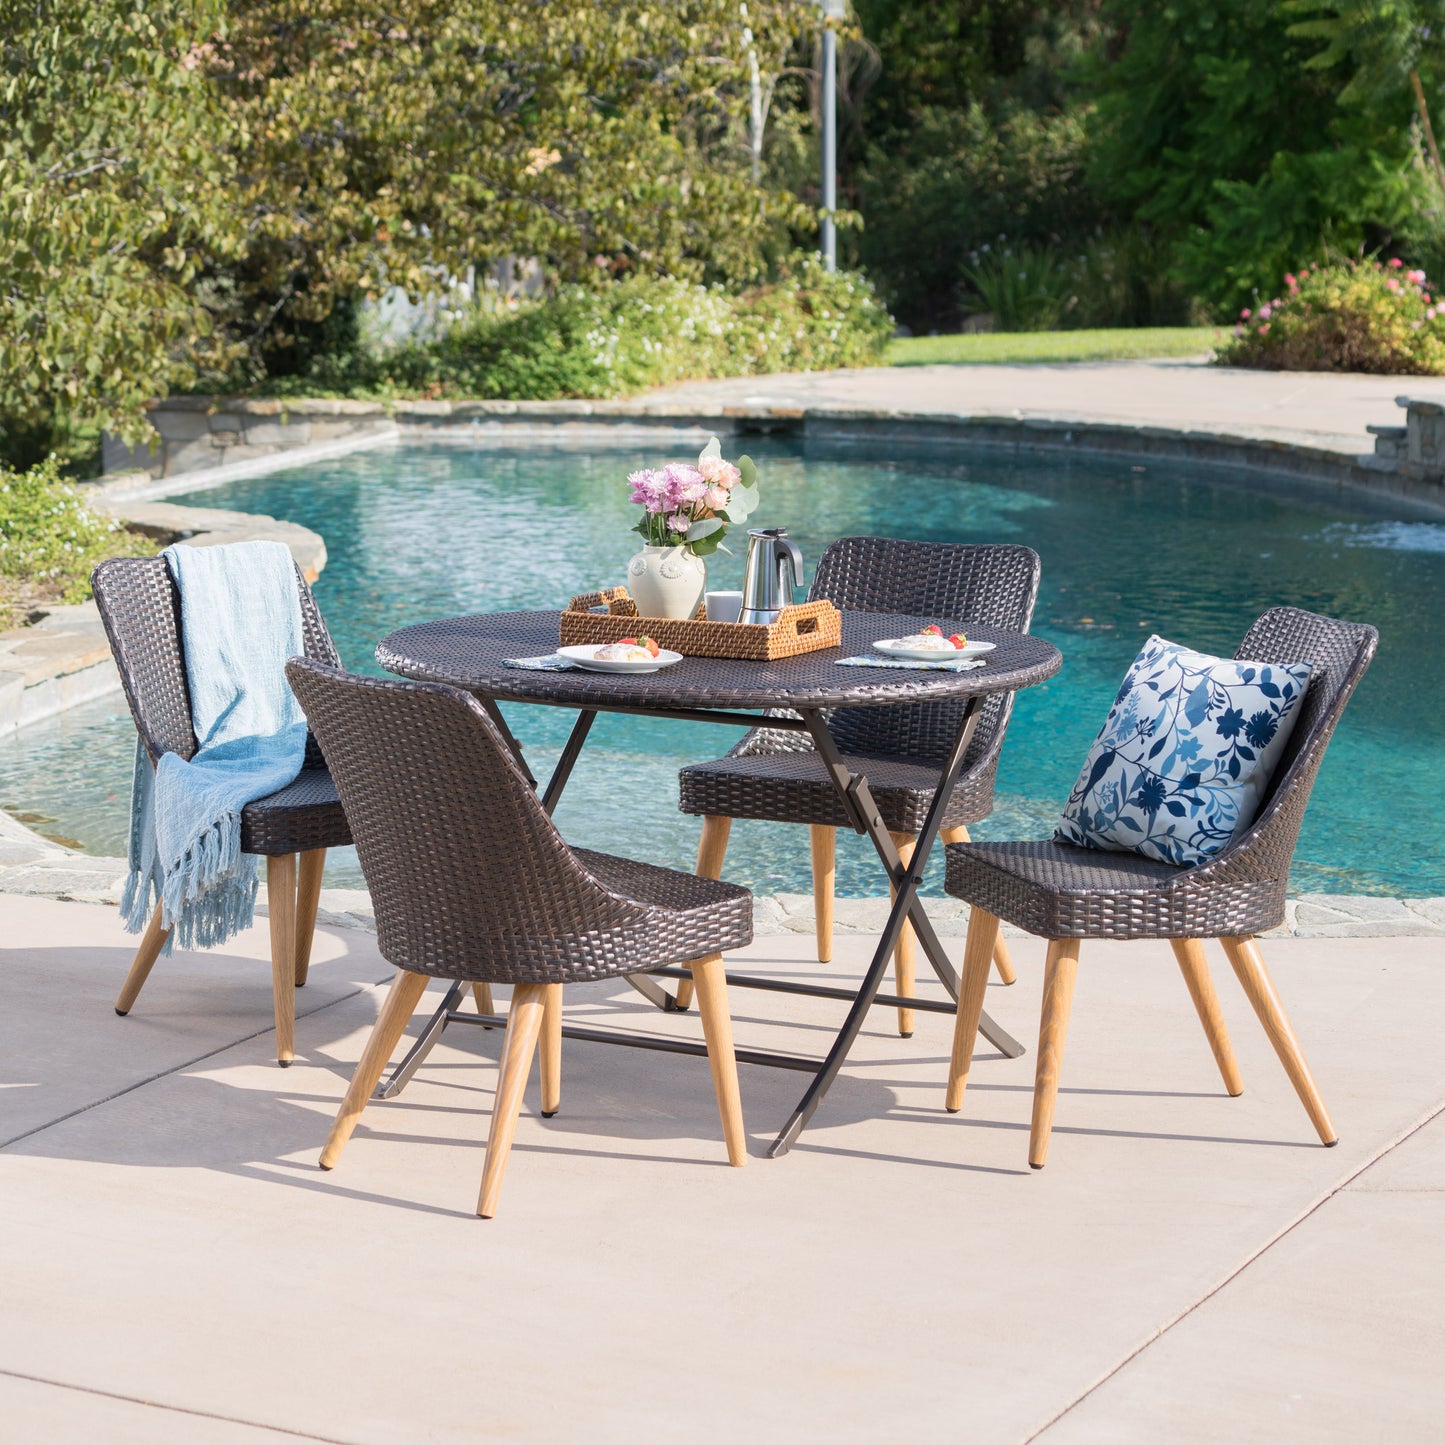 Othon Outdoor 5 Piece Multi-brown Wicker Dining Set with Table and Chairs